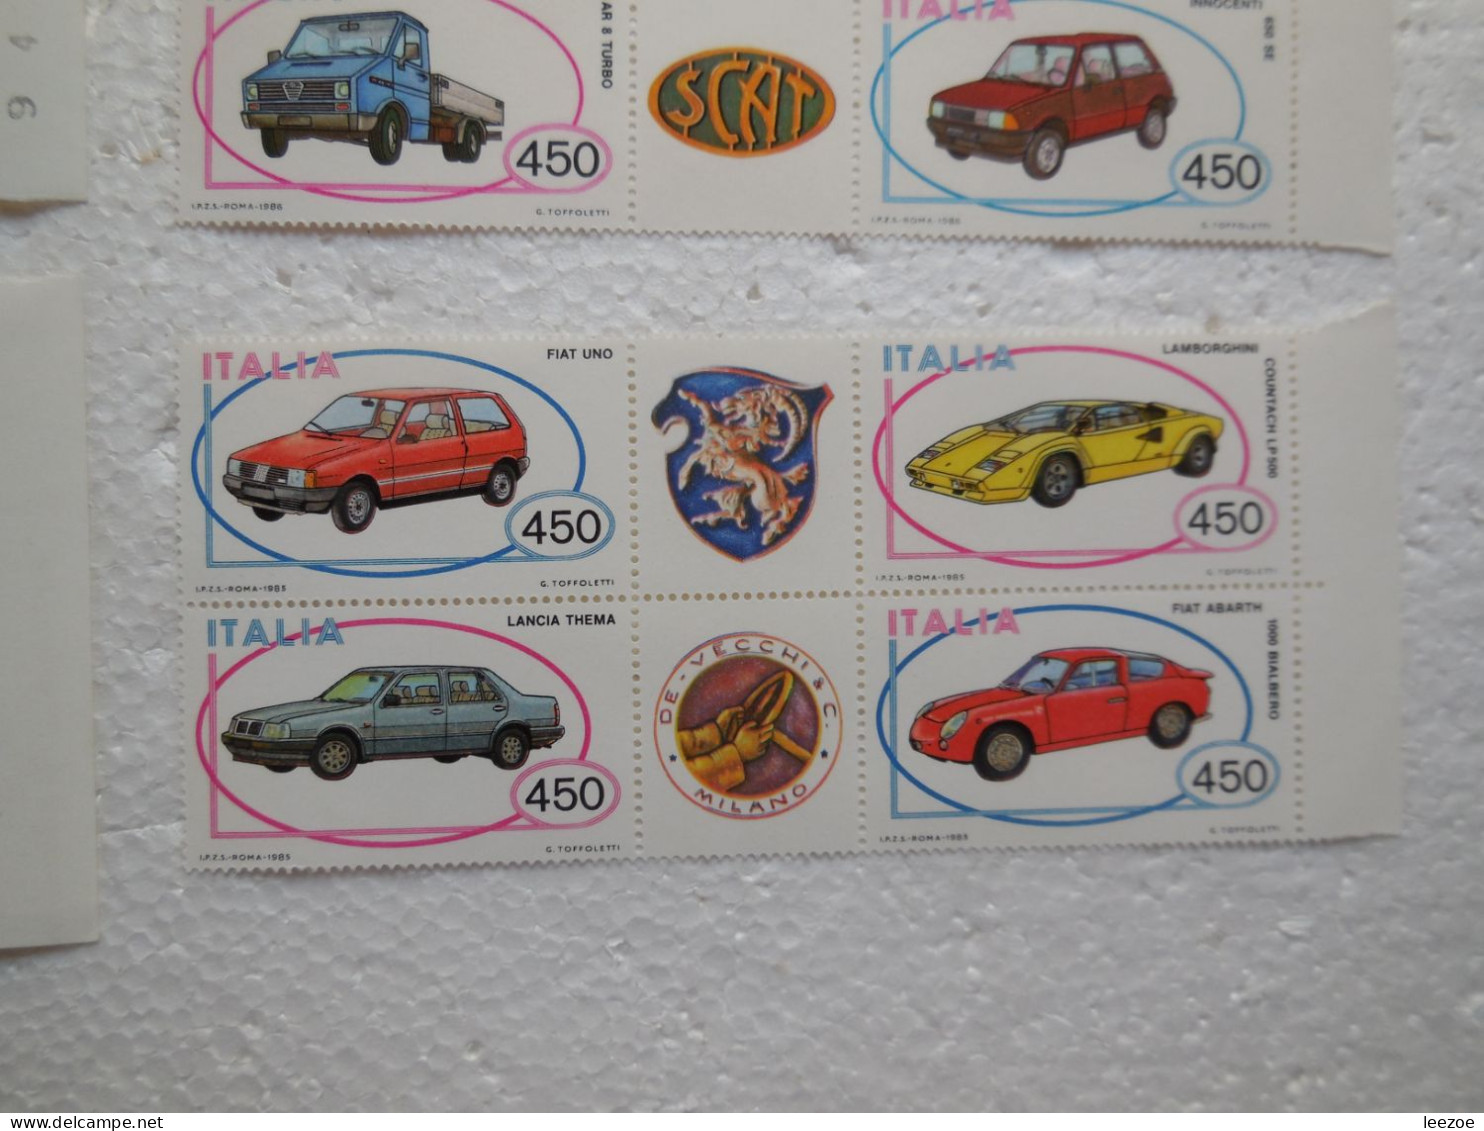 STAMP ITALIA, lot TIMBRES ITALIEN, timbres SCAT SIMI MILANO VOITURES SPORT TRACTEURS..  ...ref N5/40/8